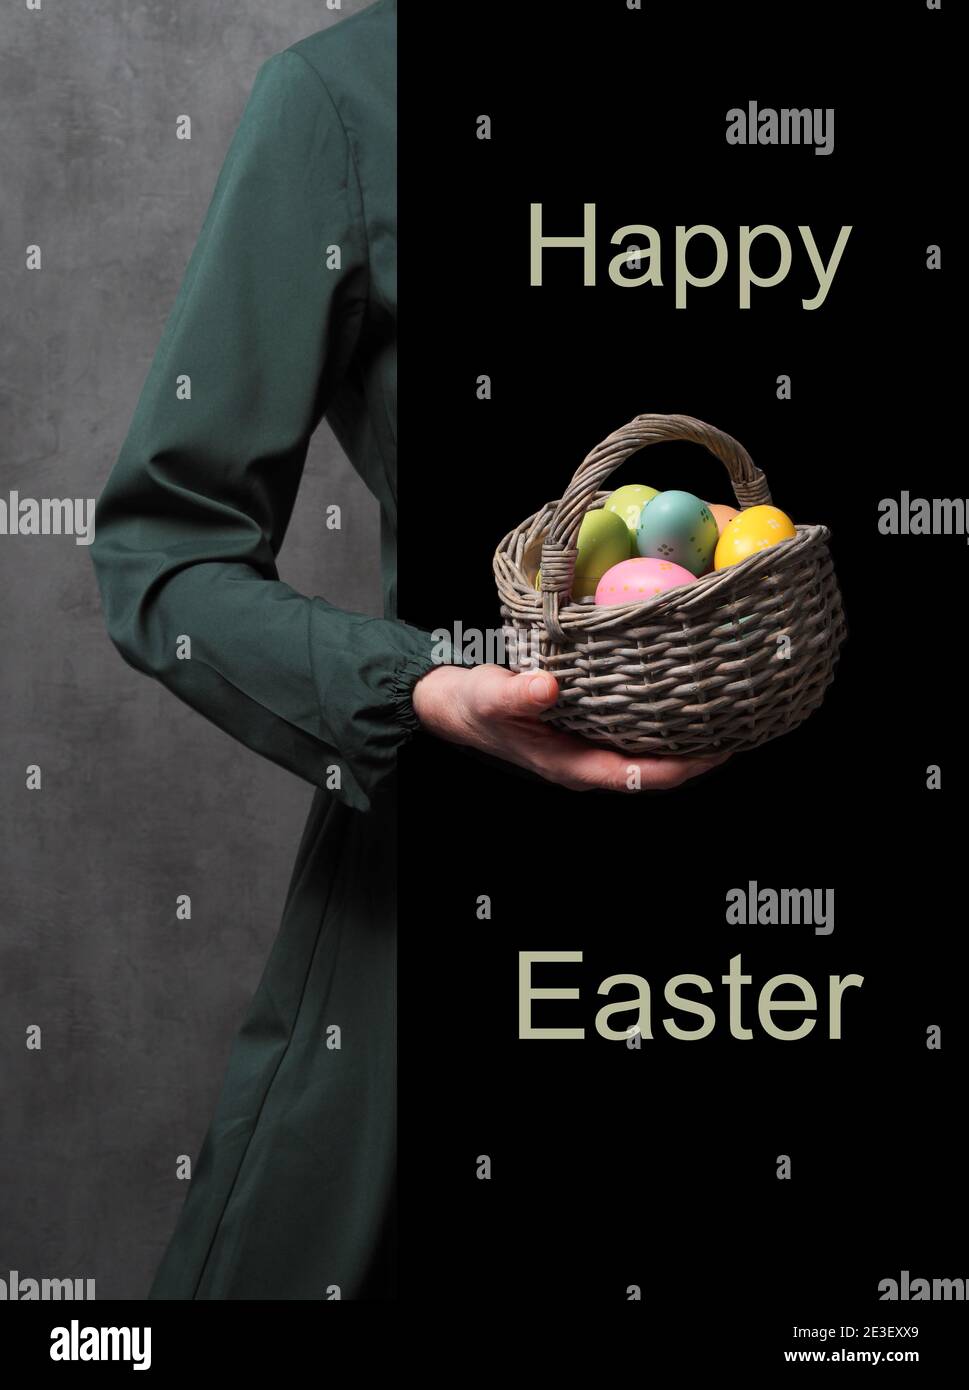 Female hand in dark green dress holding basket with colored decorative easter eggs in front of black wall with text: Happy Easter. Copy space.  Stock Photo